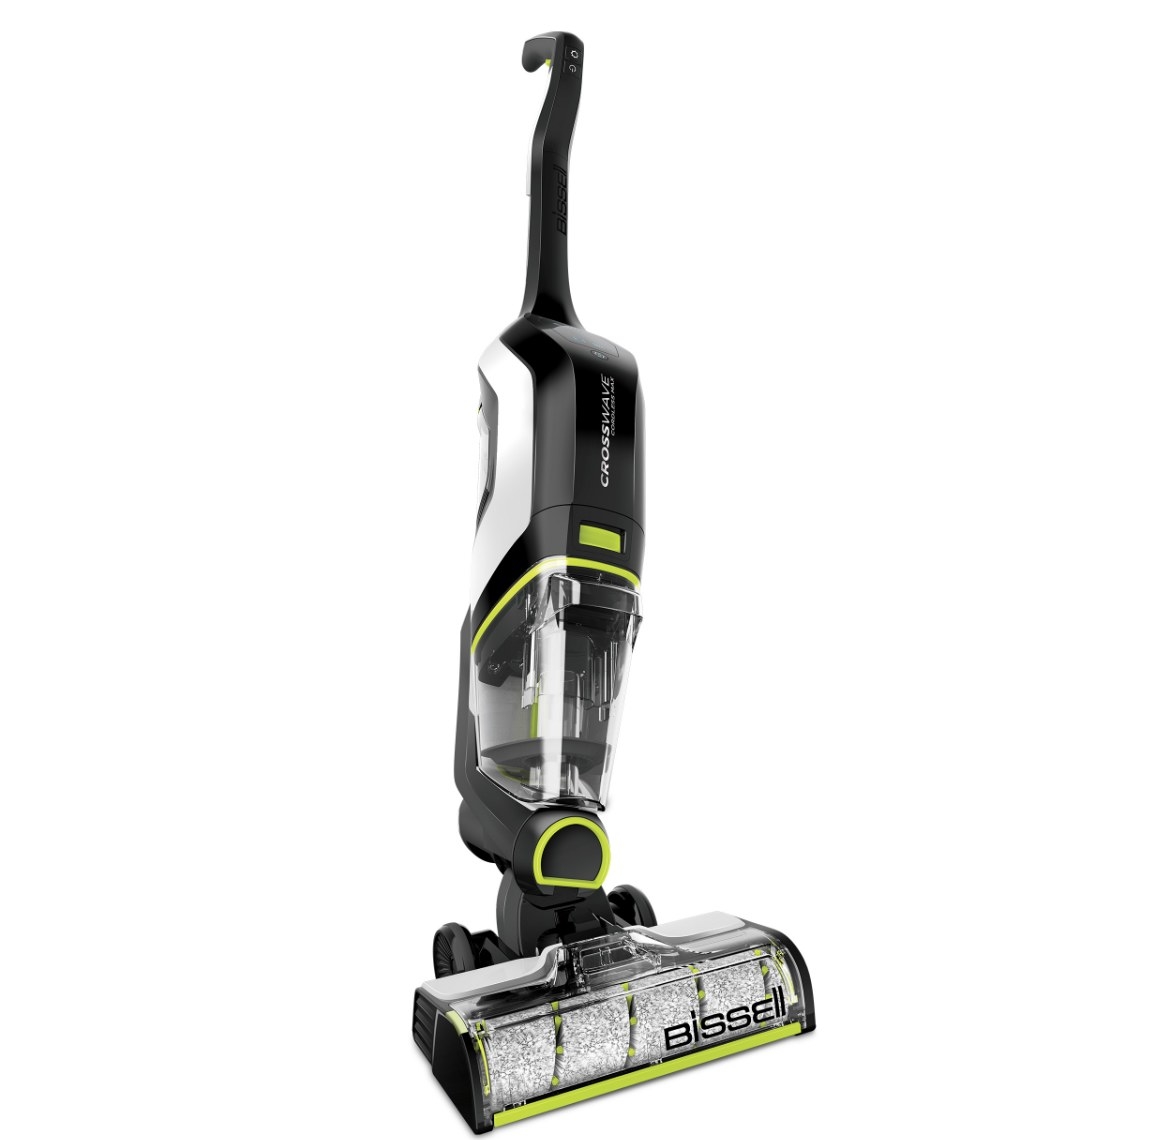 The cordless wet and dry vacuum in black